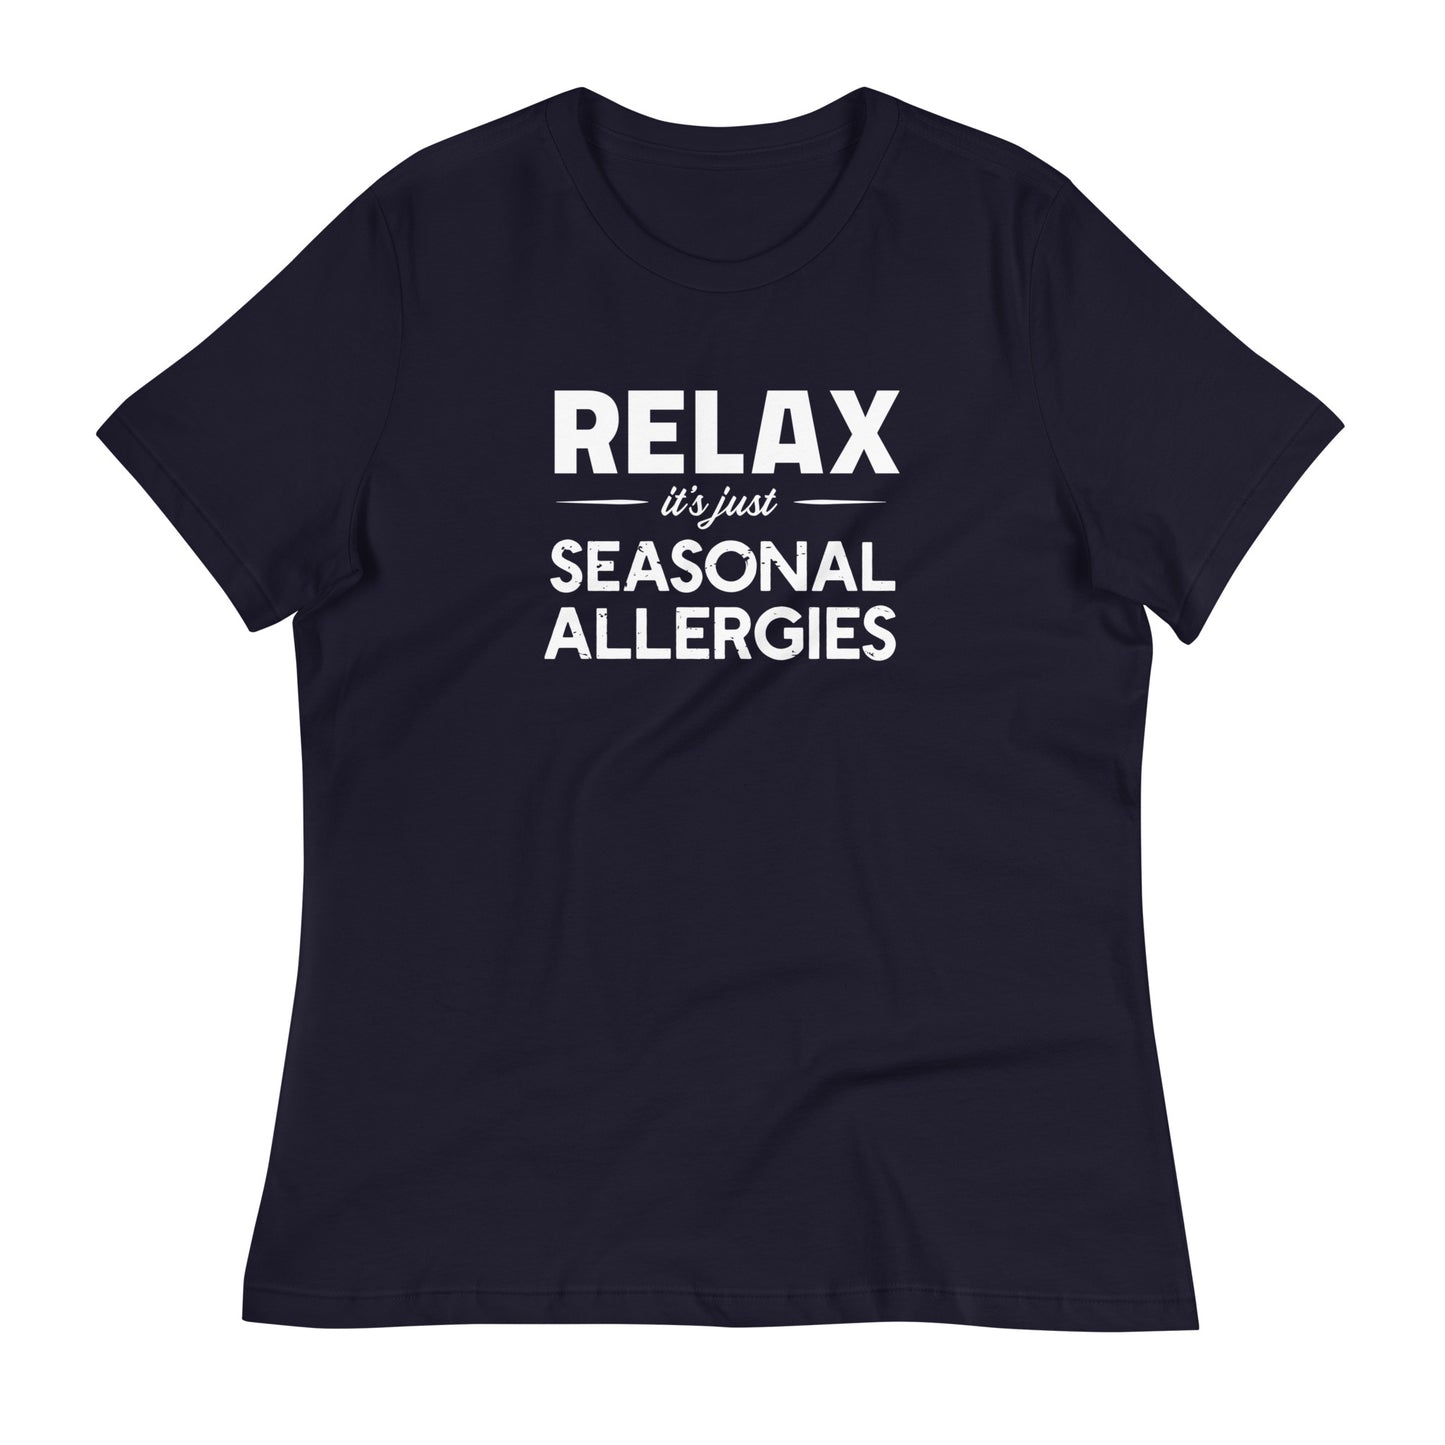 Navy women's relaxed fit t-shirt with white graphic: "RELAX it's just SEASONAL ALLERGIES"